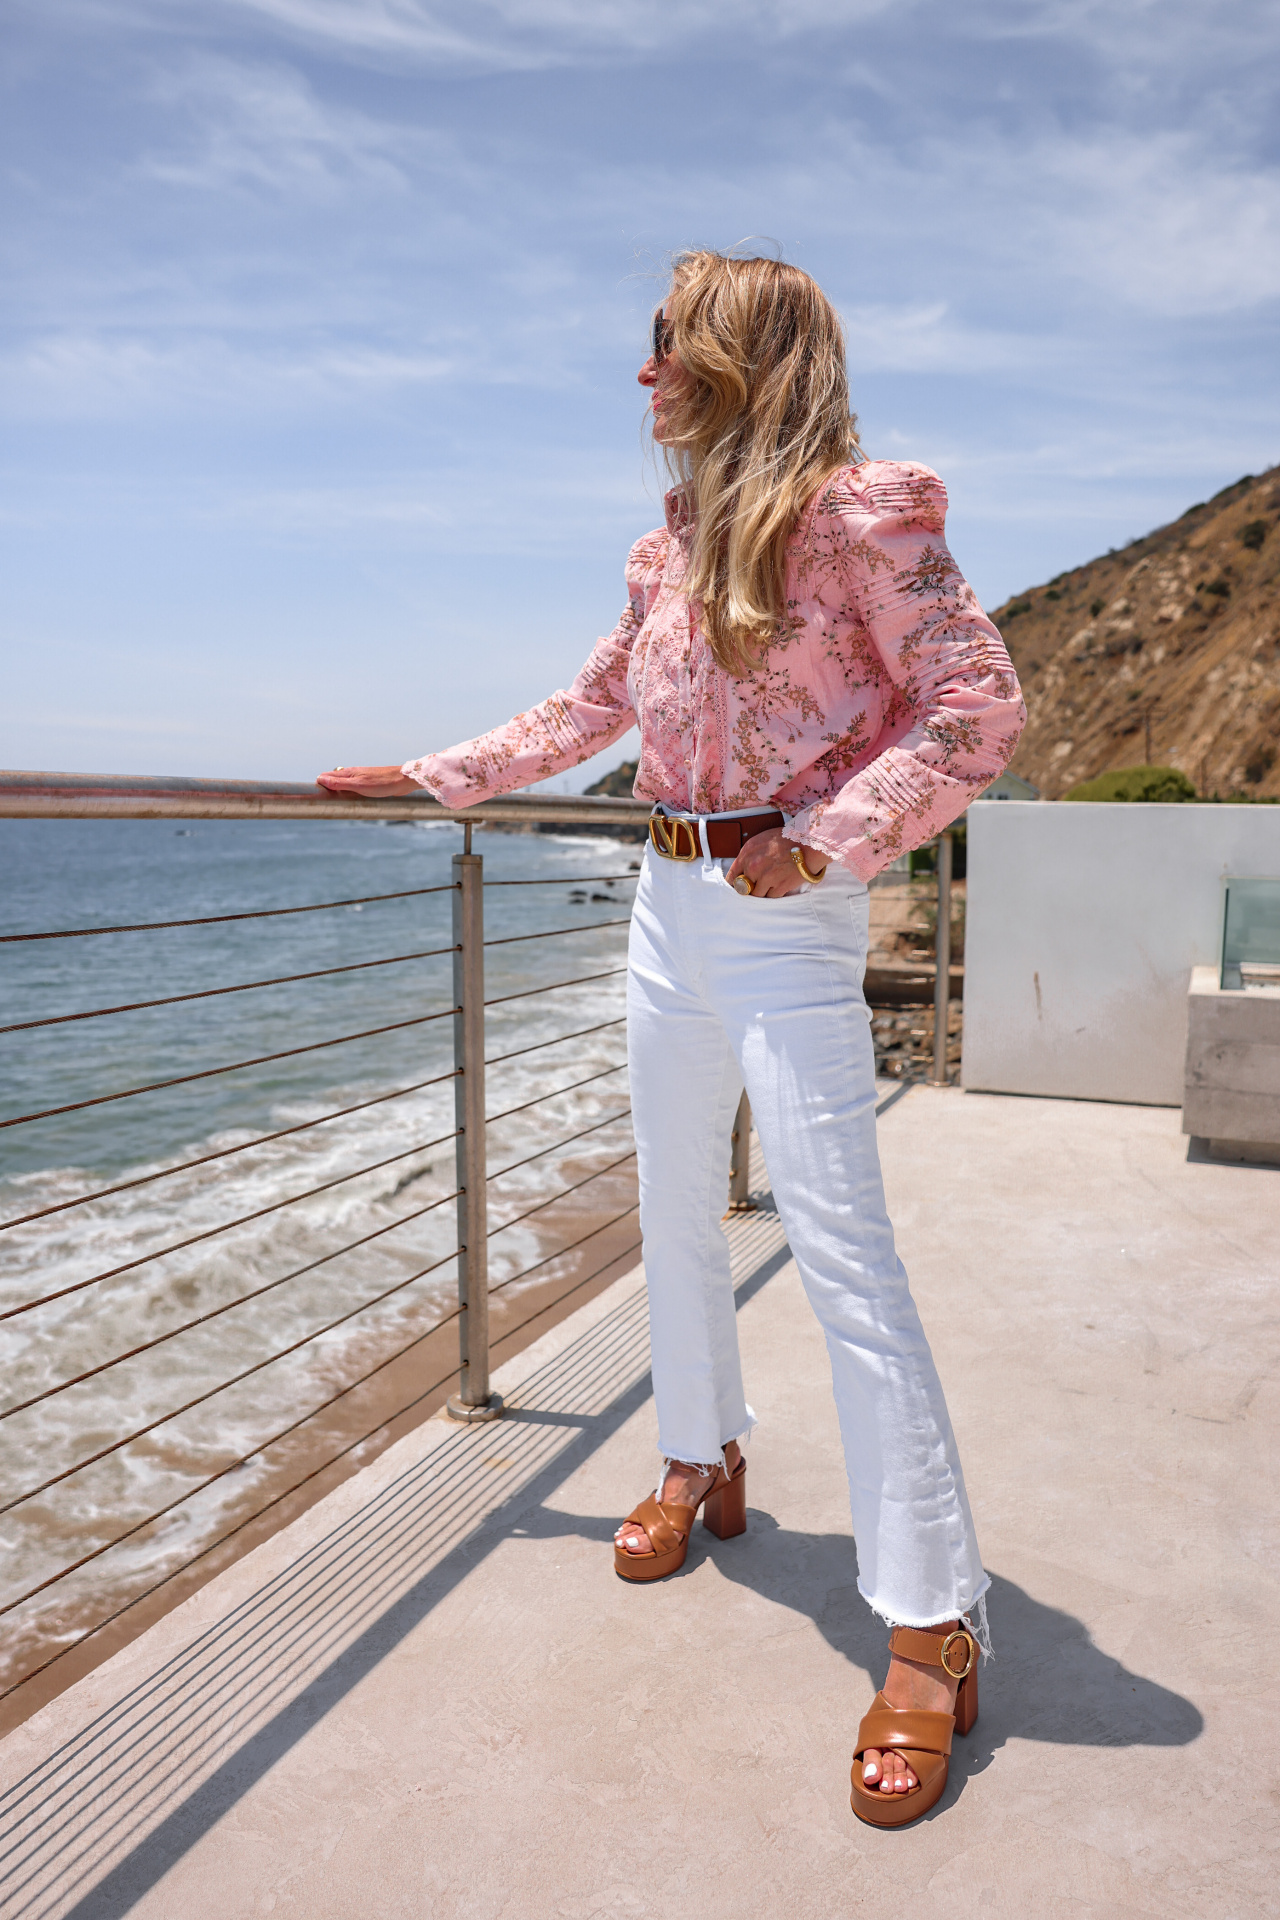 summer mom style, best summer mom outfits, summer mom outfits 2022, casual mom outfits summer, stylish mom outfits 2022, fashion for moms in their 30s, fashion for moms in their 40s, cute mom outfits, casual mom outfits, erin busbee, busbee style, fashion over 40, malibu, california, loveshackfancy pink printed top, white mother hustler jeans, see by chloe platform heels, saint laurent square sunglasses, paco rabbane chunky gold necklace, dean davidson hoops